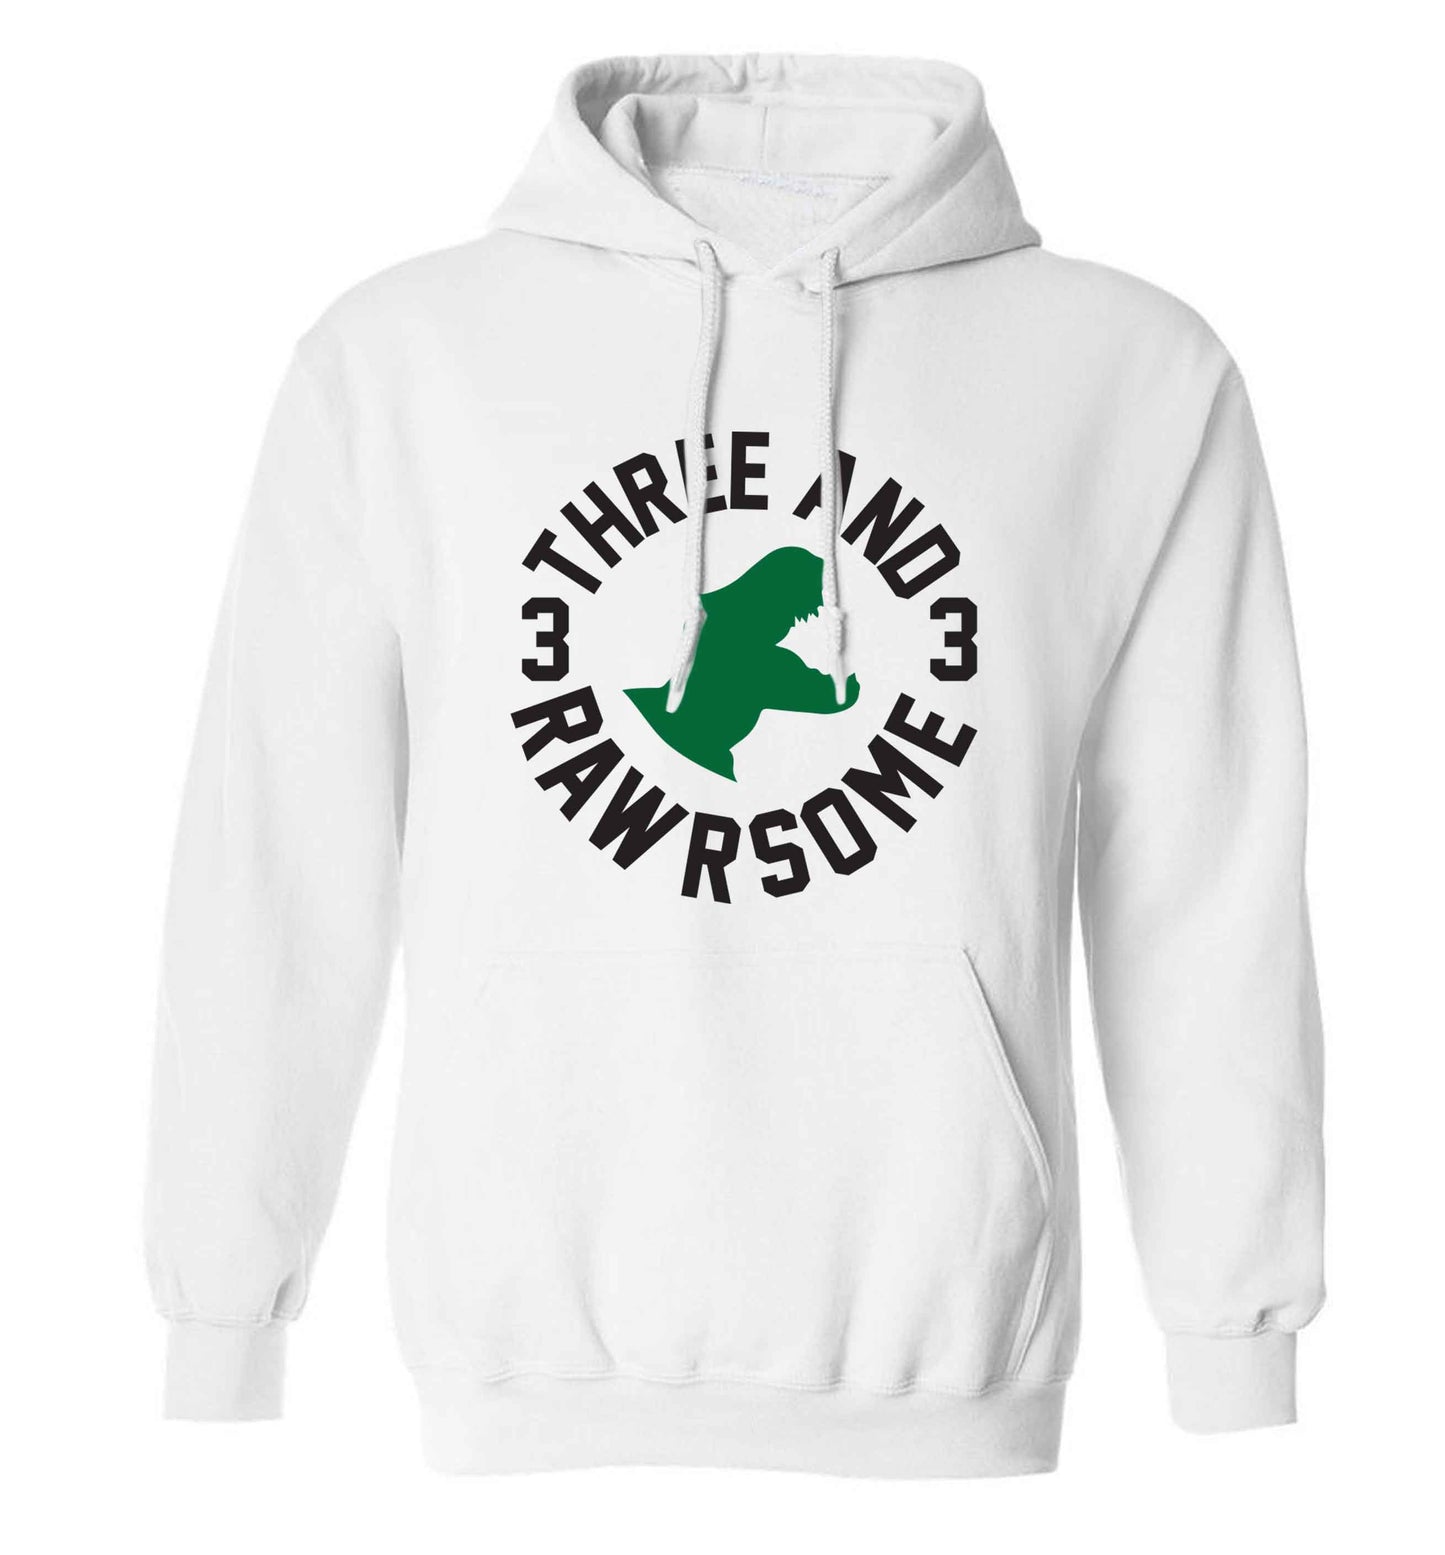 Three and rawrsome adults unisex white hoodie 2XL